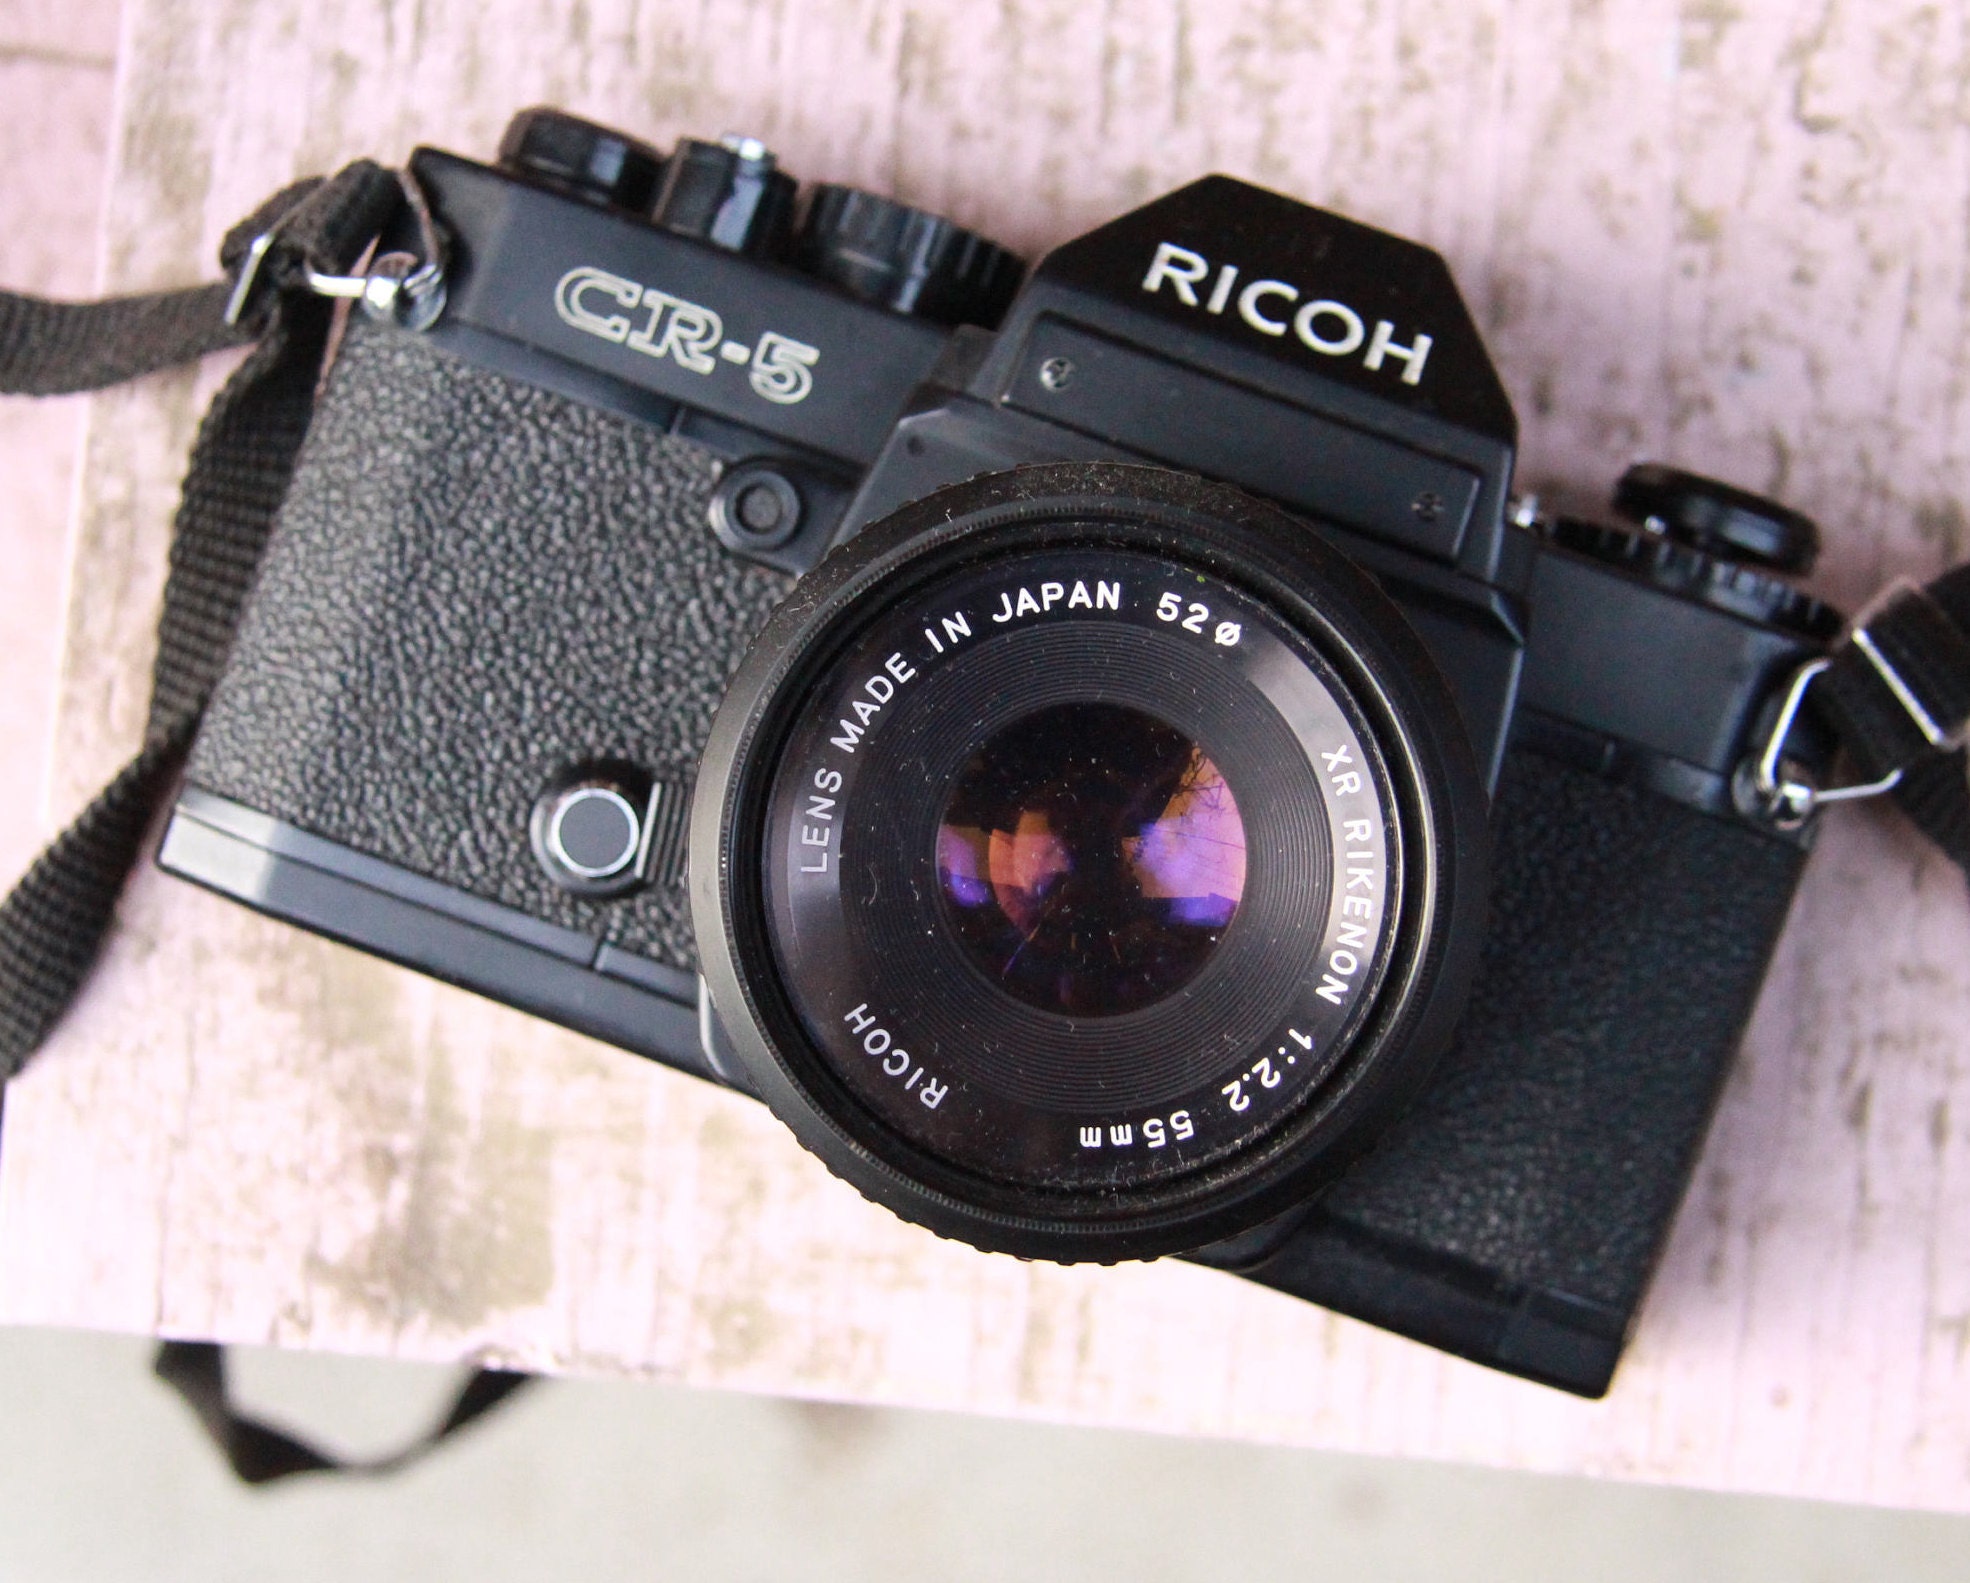 what is ricoh 5-in-1